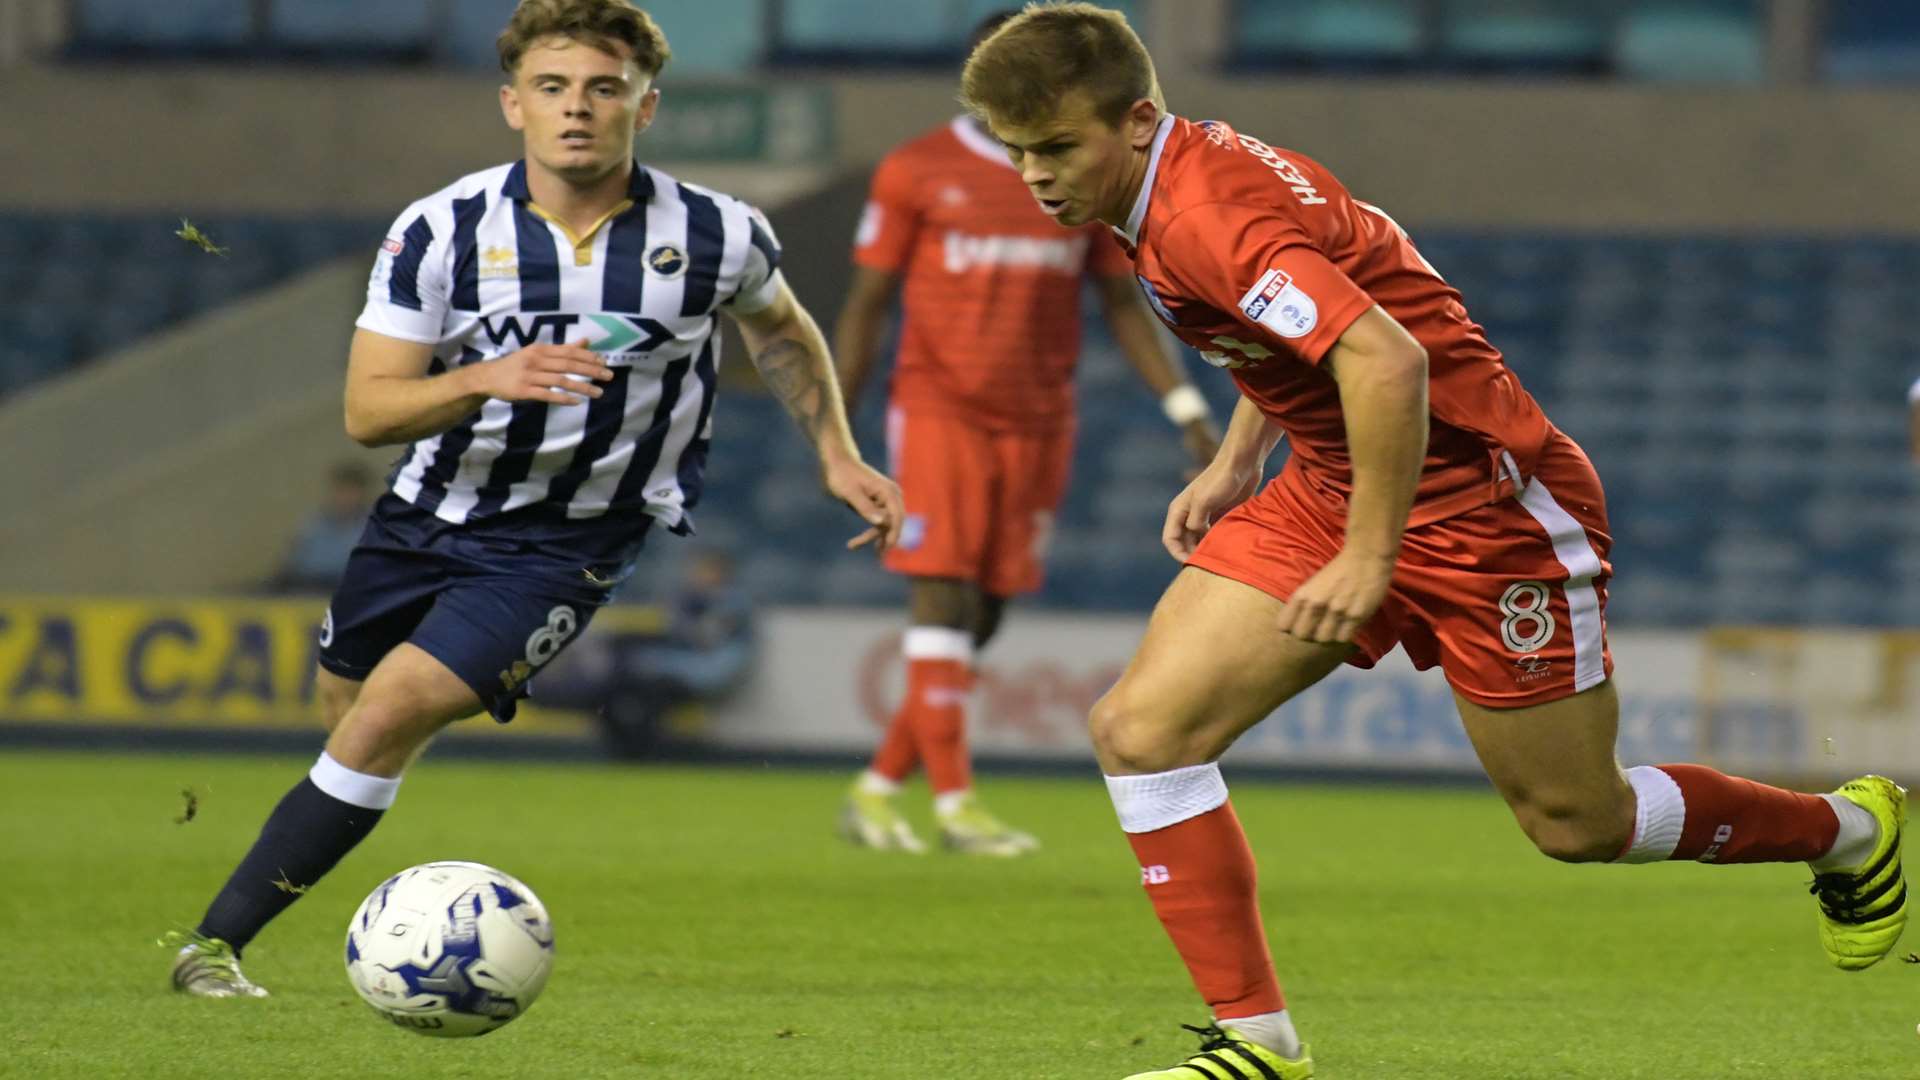 Jake Hessenthaler was one of Justin Edinbugh's star picks at Millwall Picture: Barry Goodwin